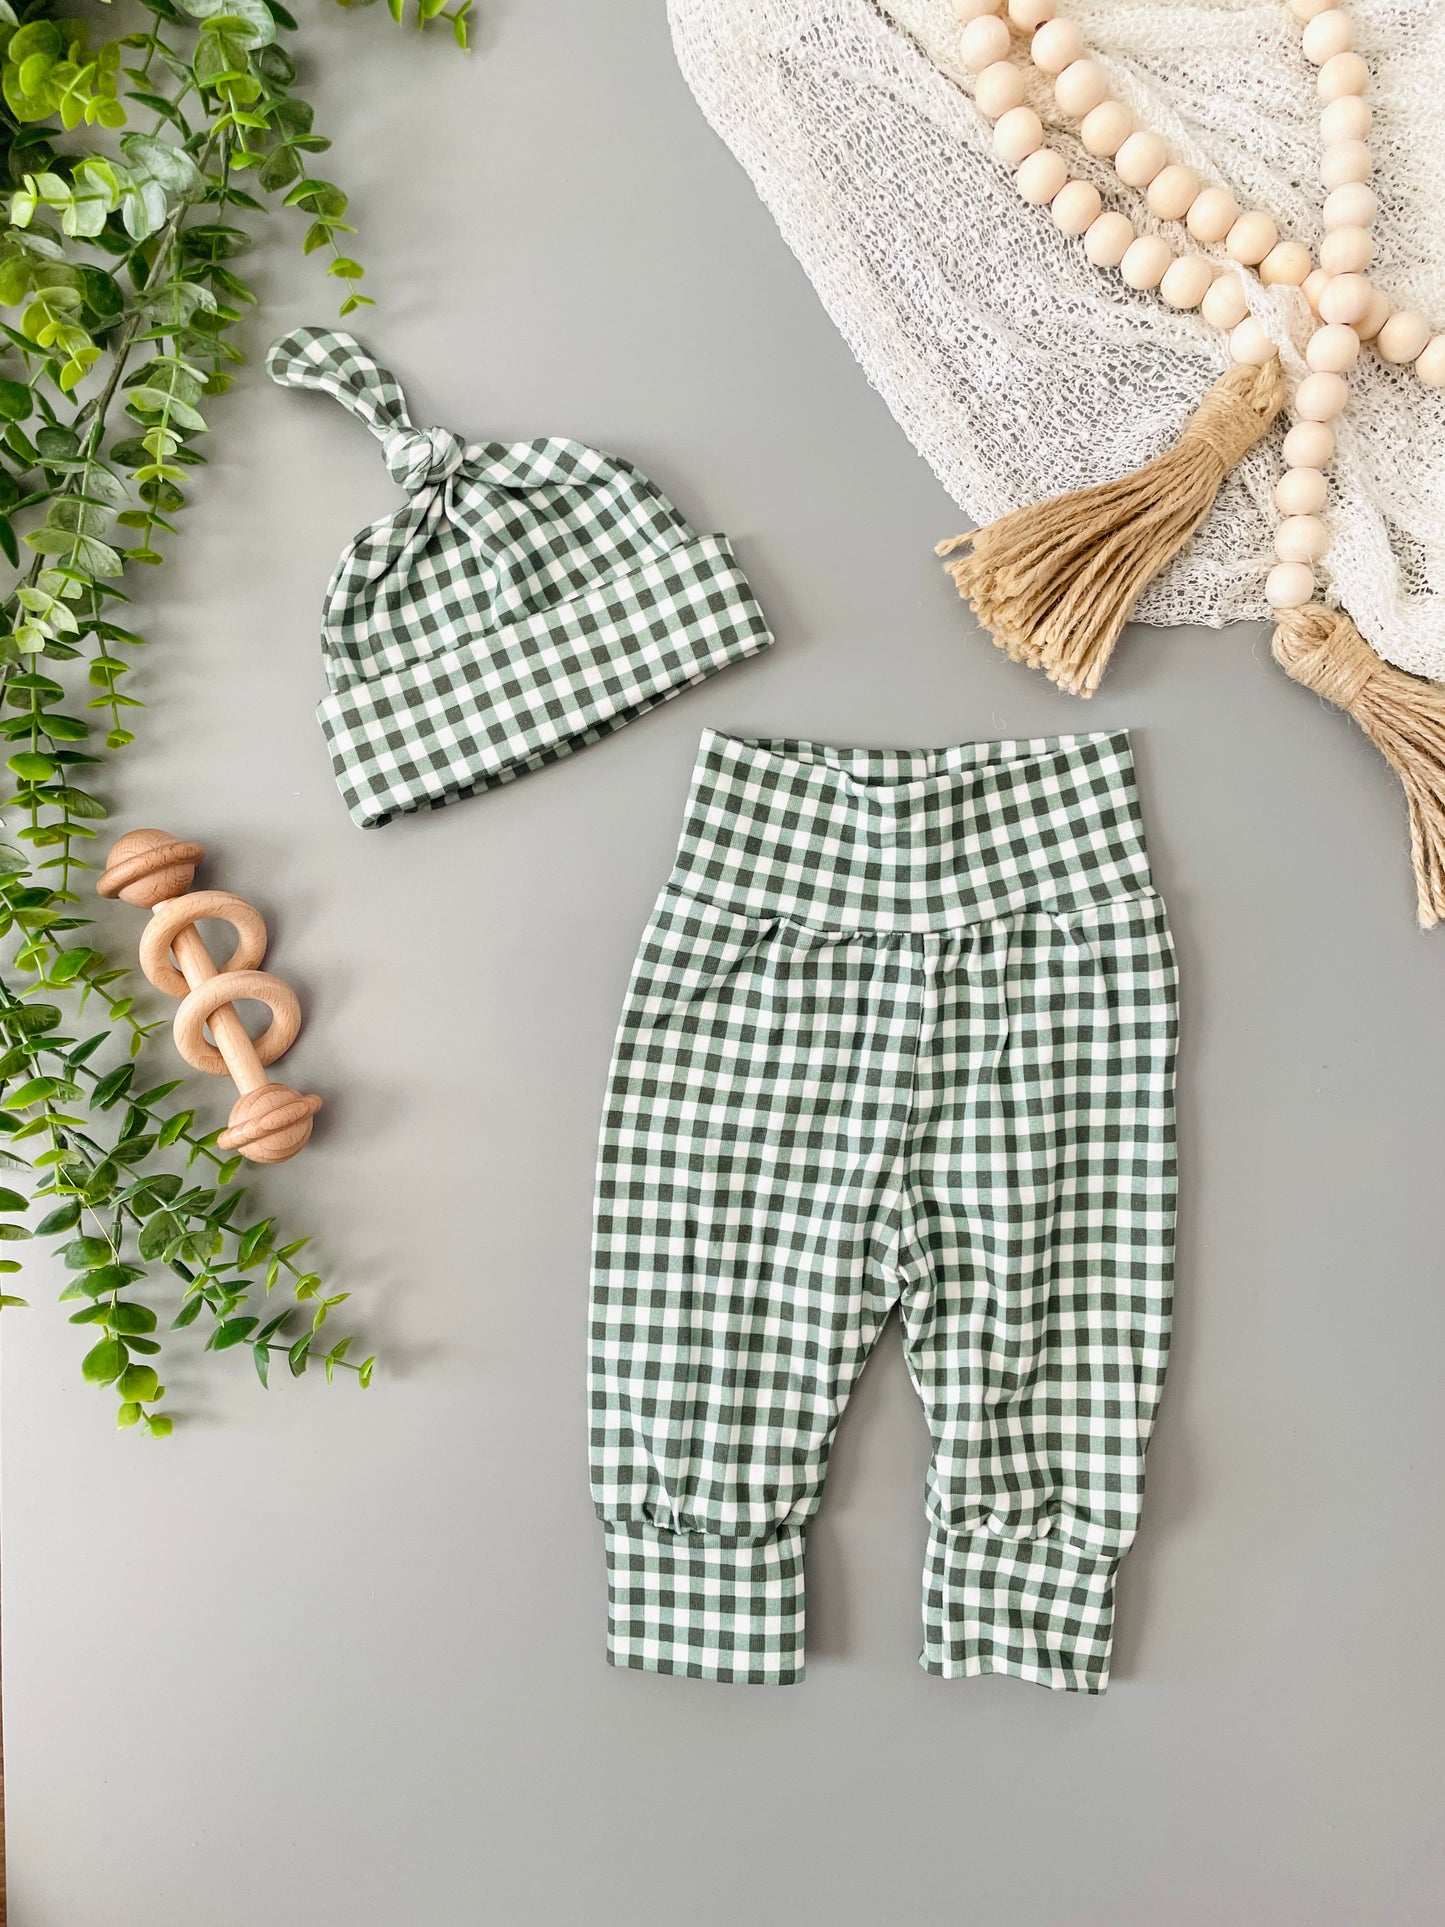 Green Gingham Baby Pants or Set